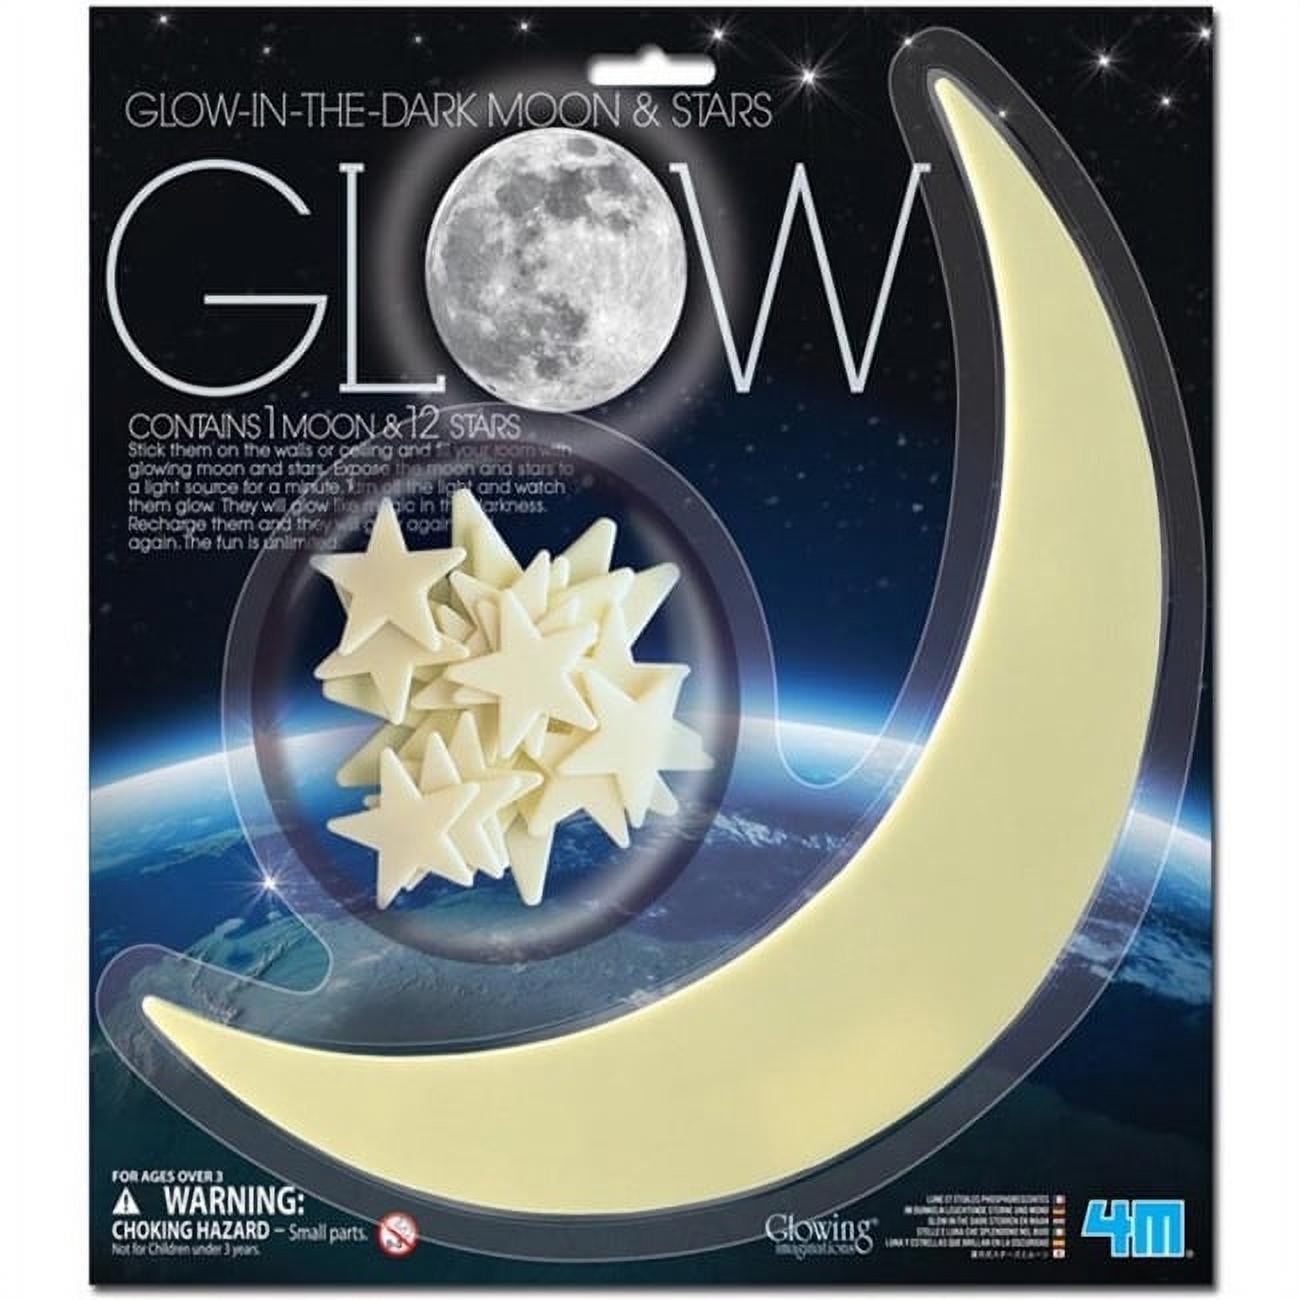 Glow crescent moon and 15 stars by glow stars new large size 